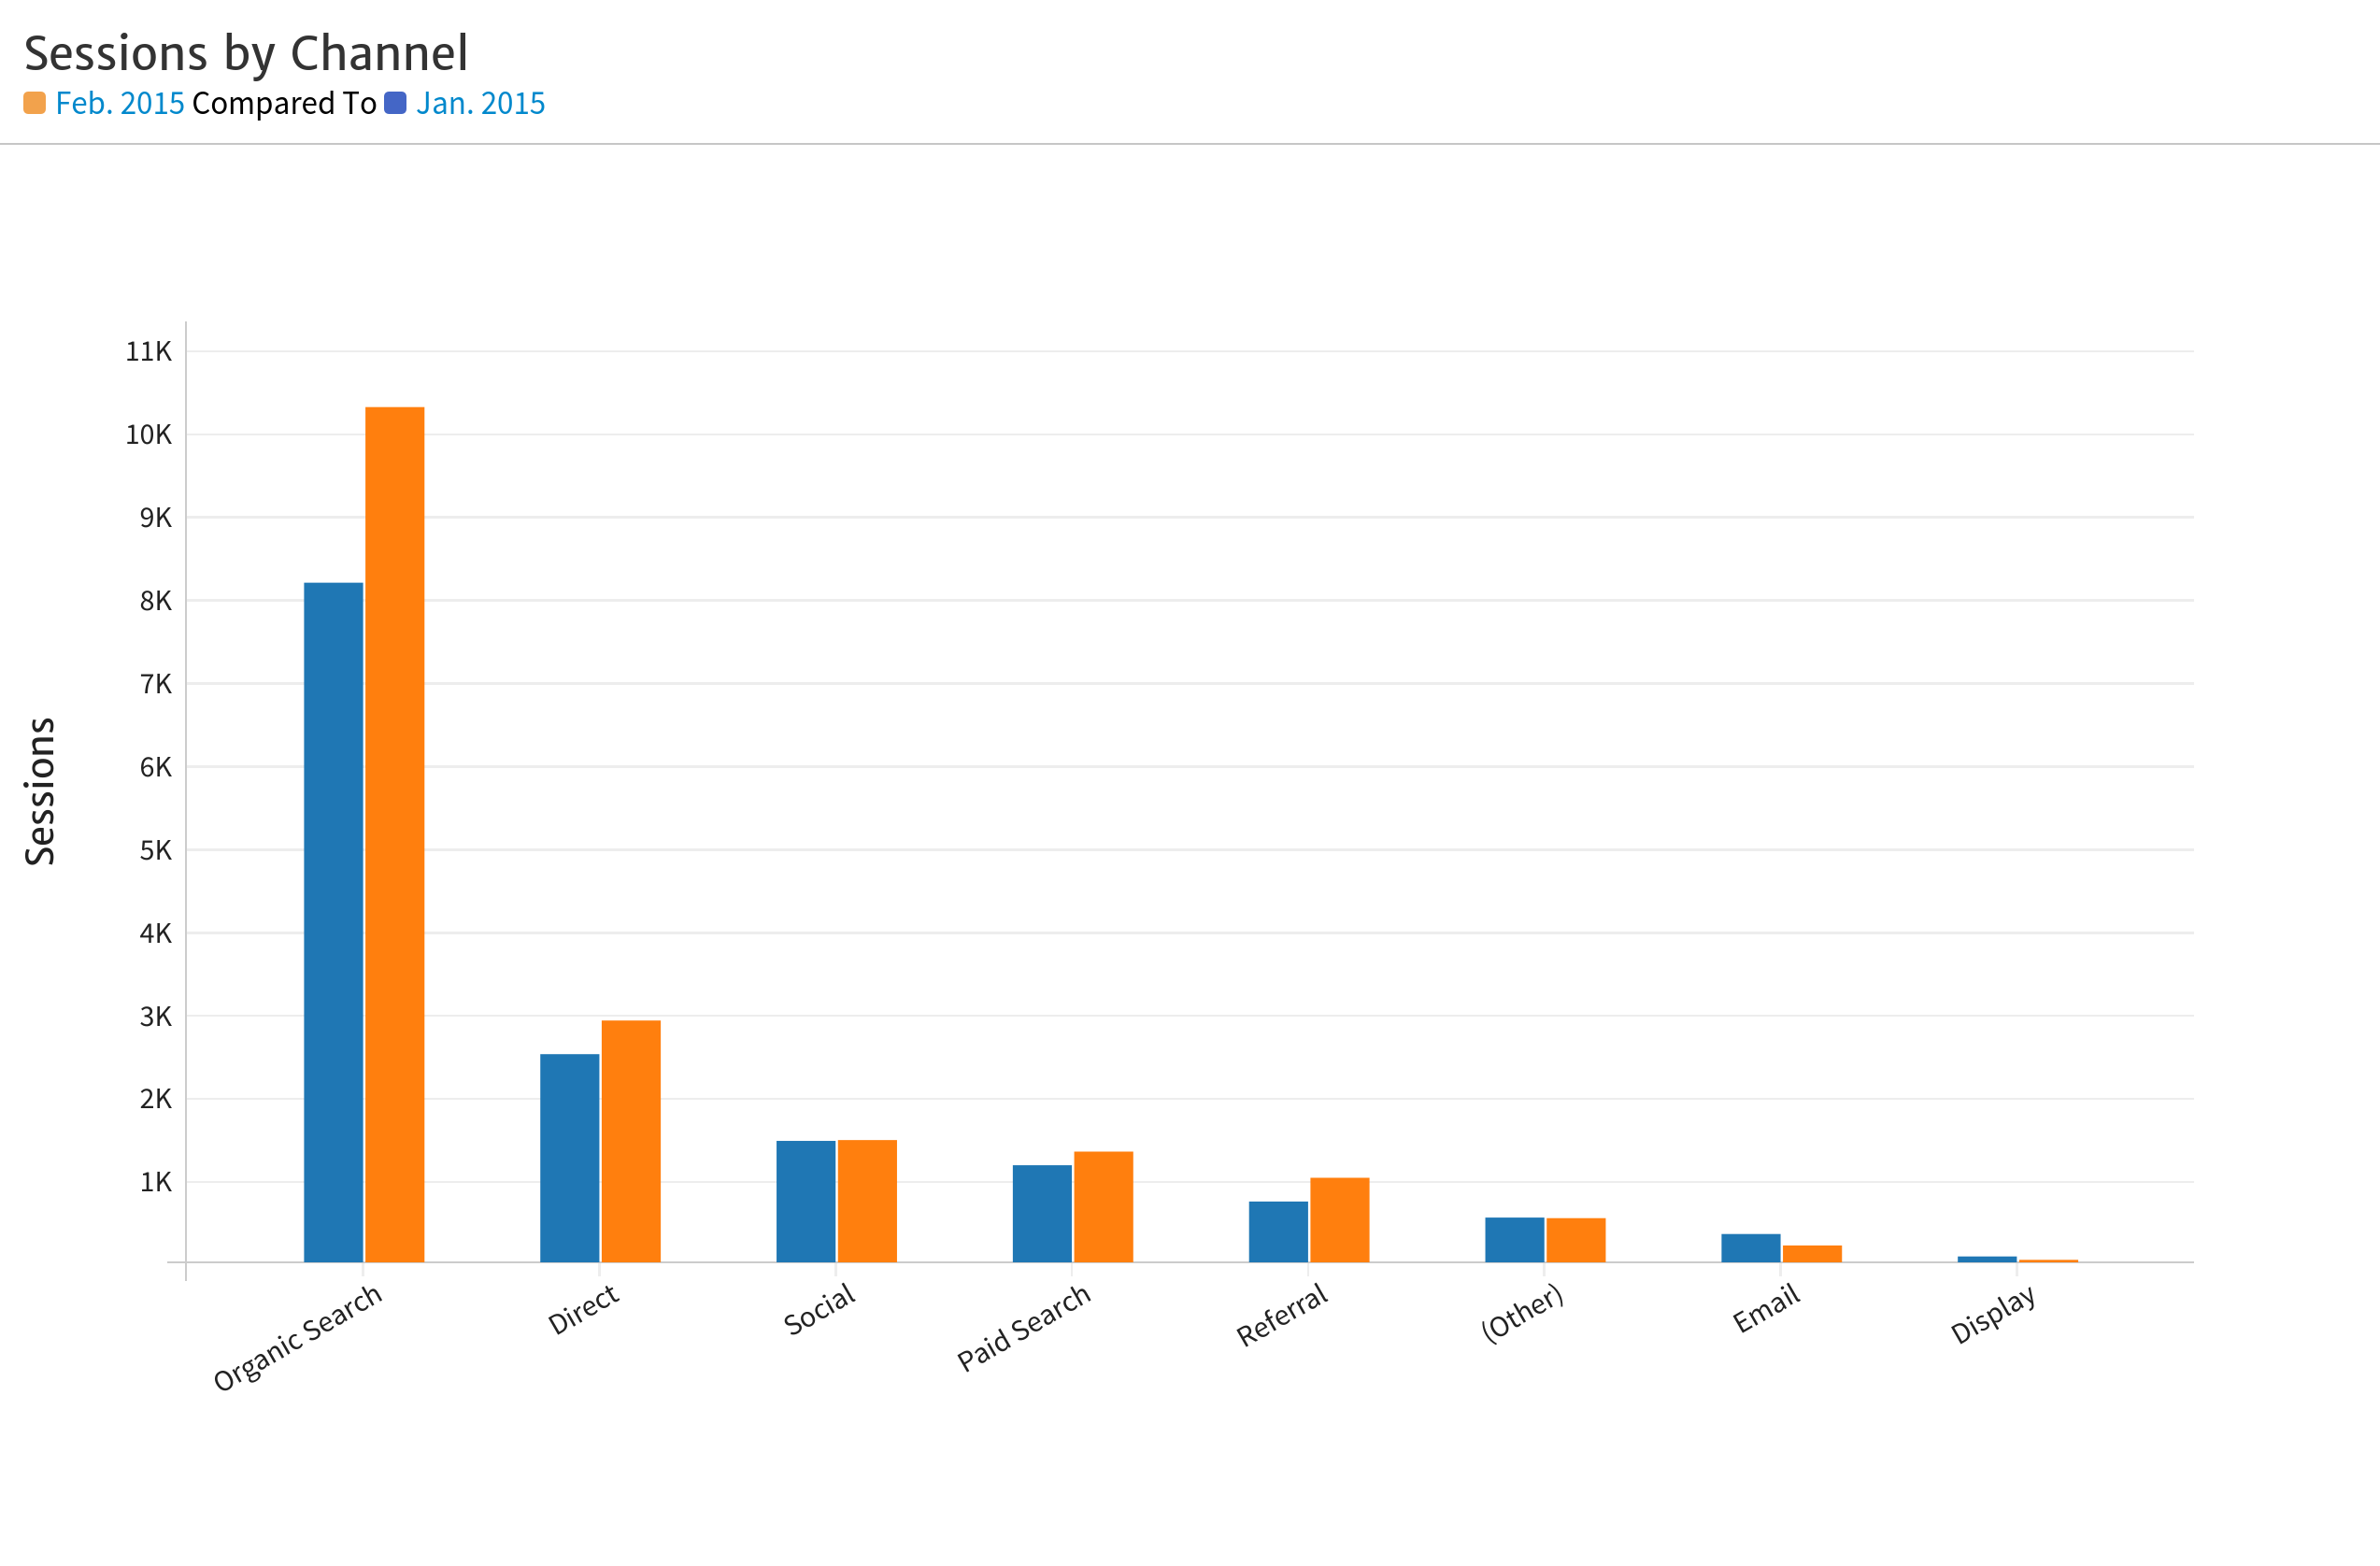 Comparing Sessions by Acquisition Channel using a Bar Chart